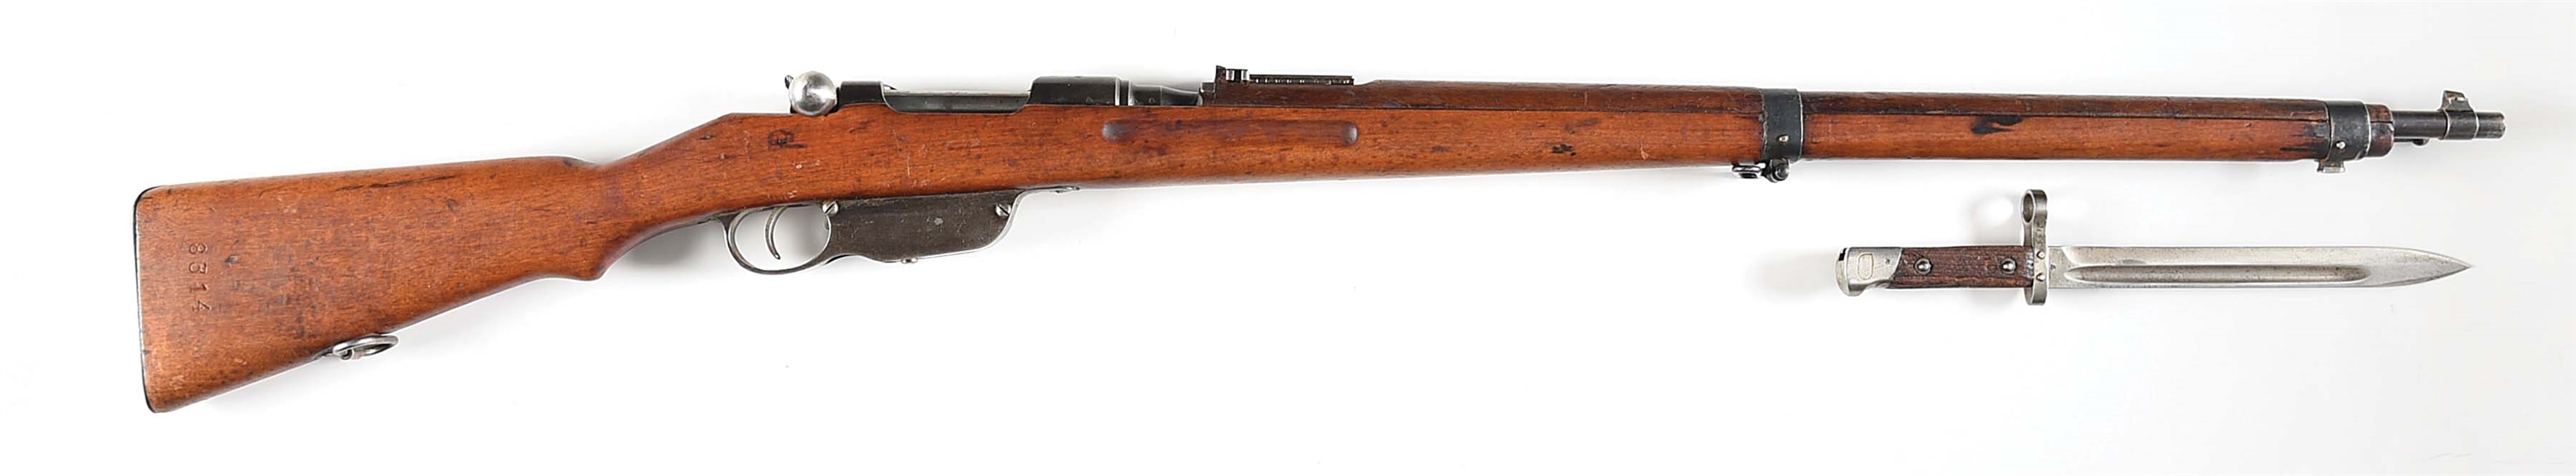 (C) STEYR M95 STRAIGHT PULL RIFLE WITH BAYONET.